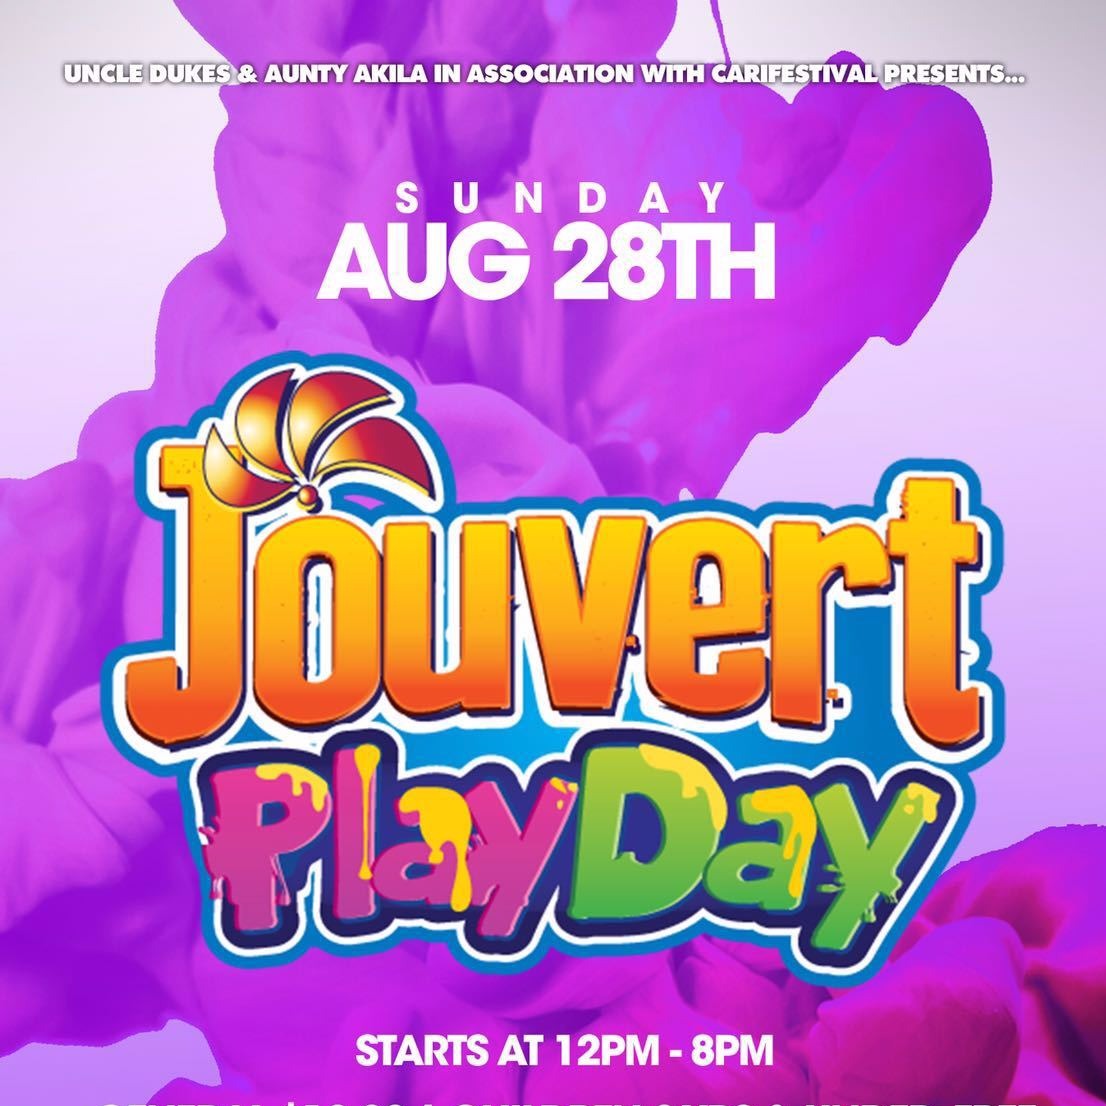 Jouvert Play Day 